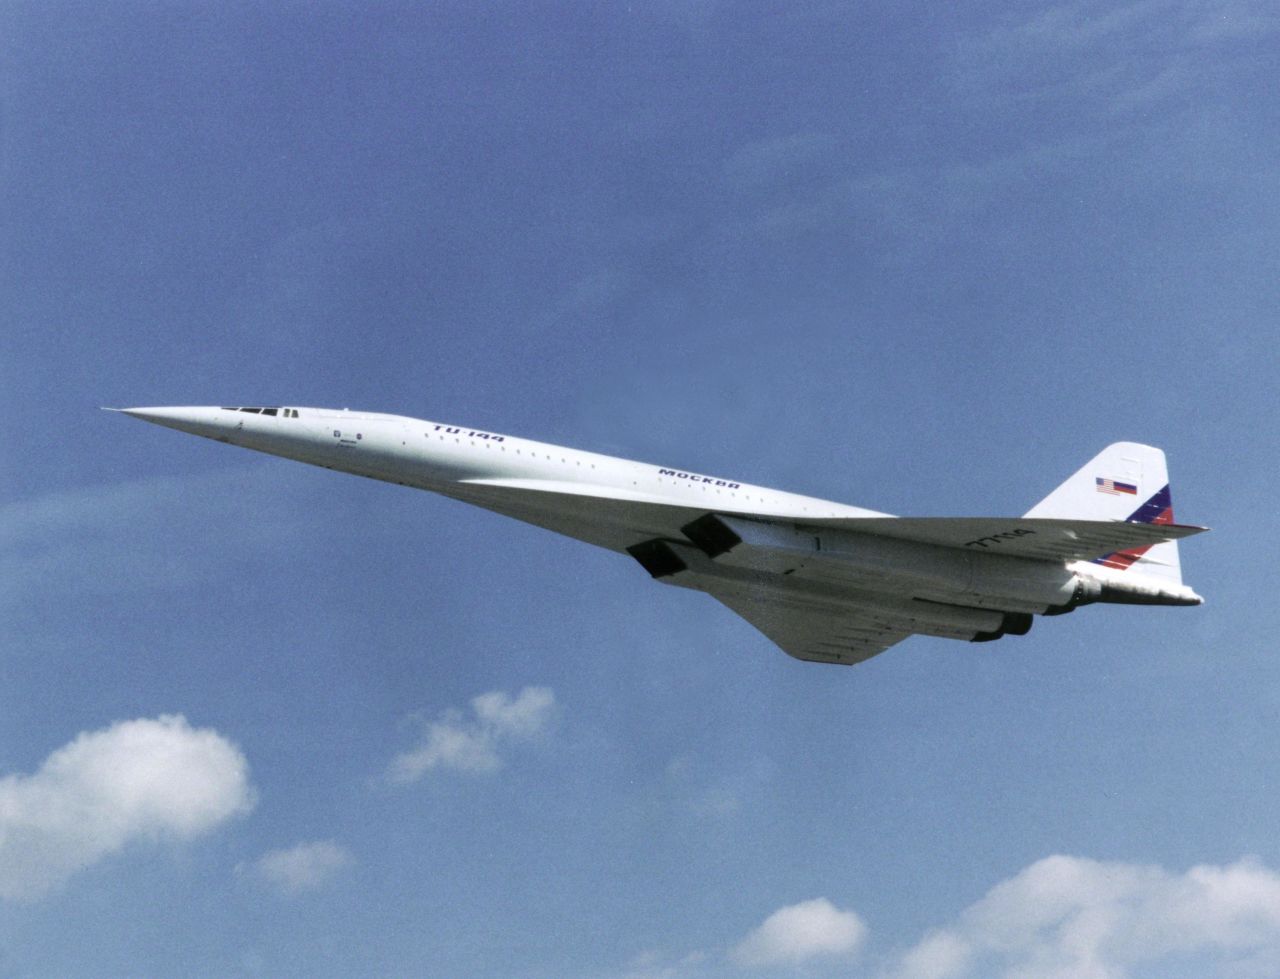 A Tupolev Tu-144 in flight over Moscow as part of a NASA-sponsored research project in 1998.